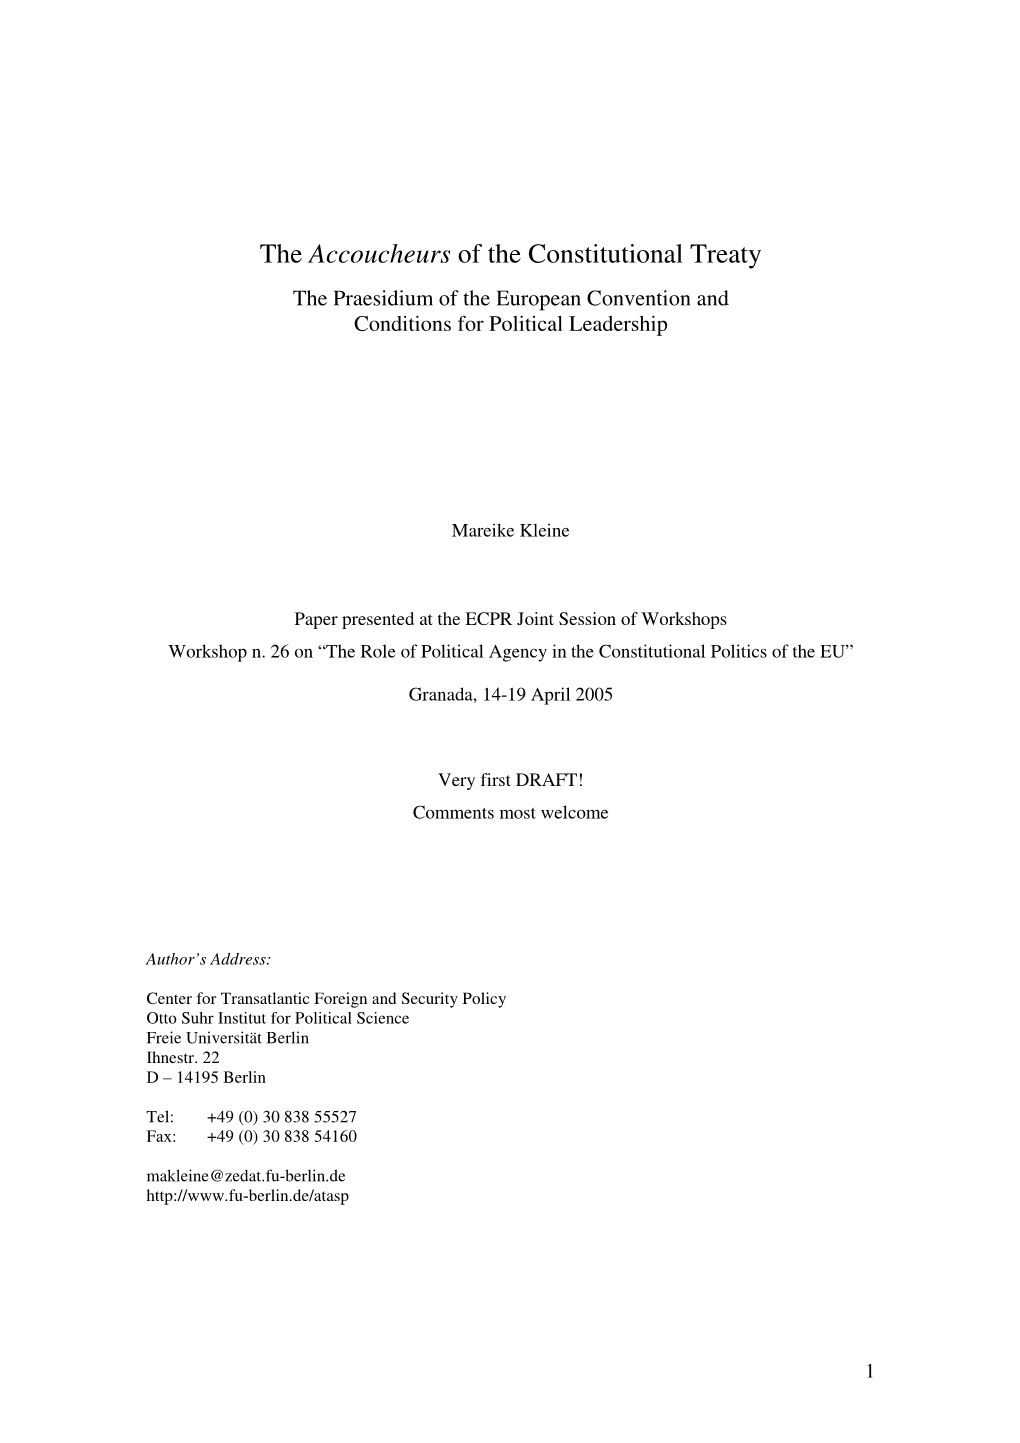 The Accoucheurs of the Constitutional Treaty the Praesidium of the European Convention and Conditions for Political Leadership